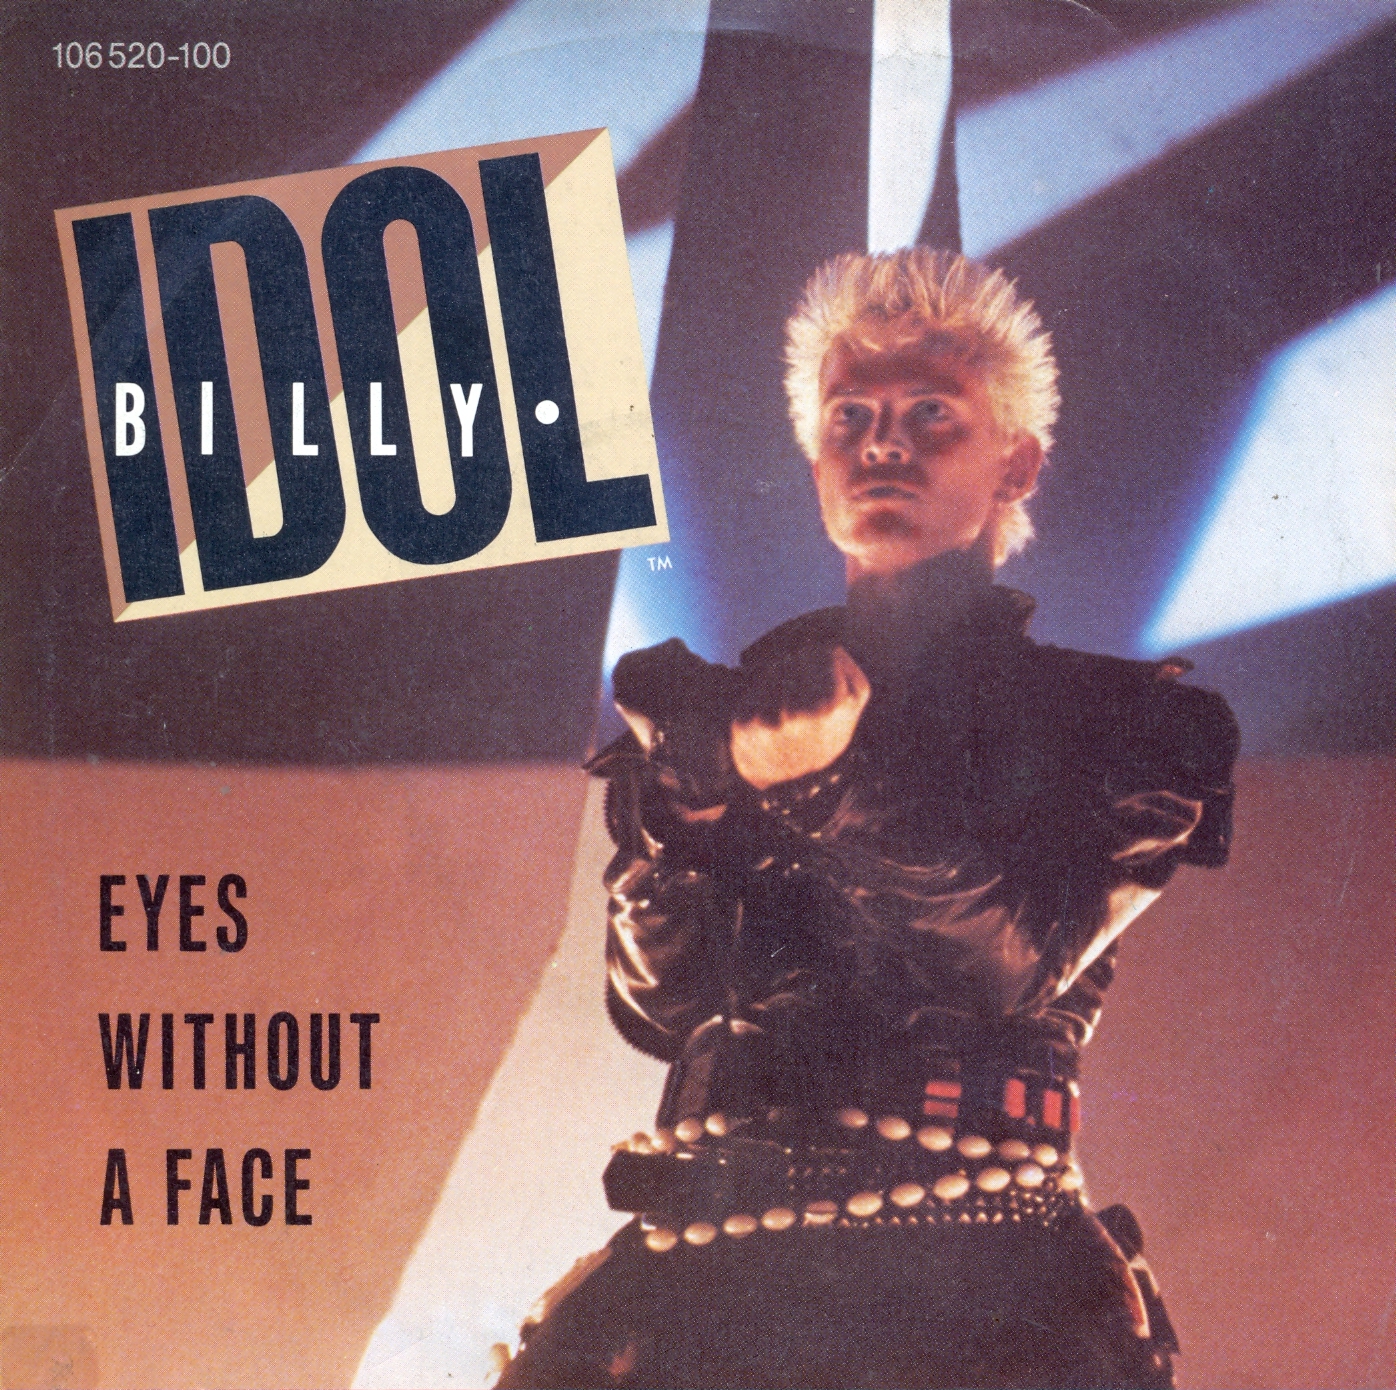 Idol Billy - Eyes without a face